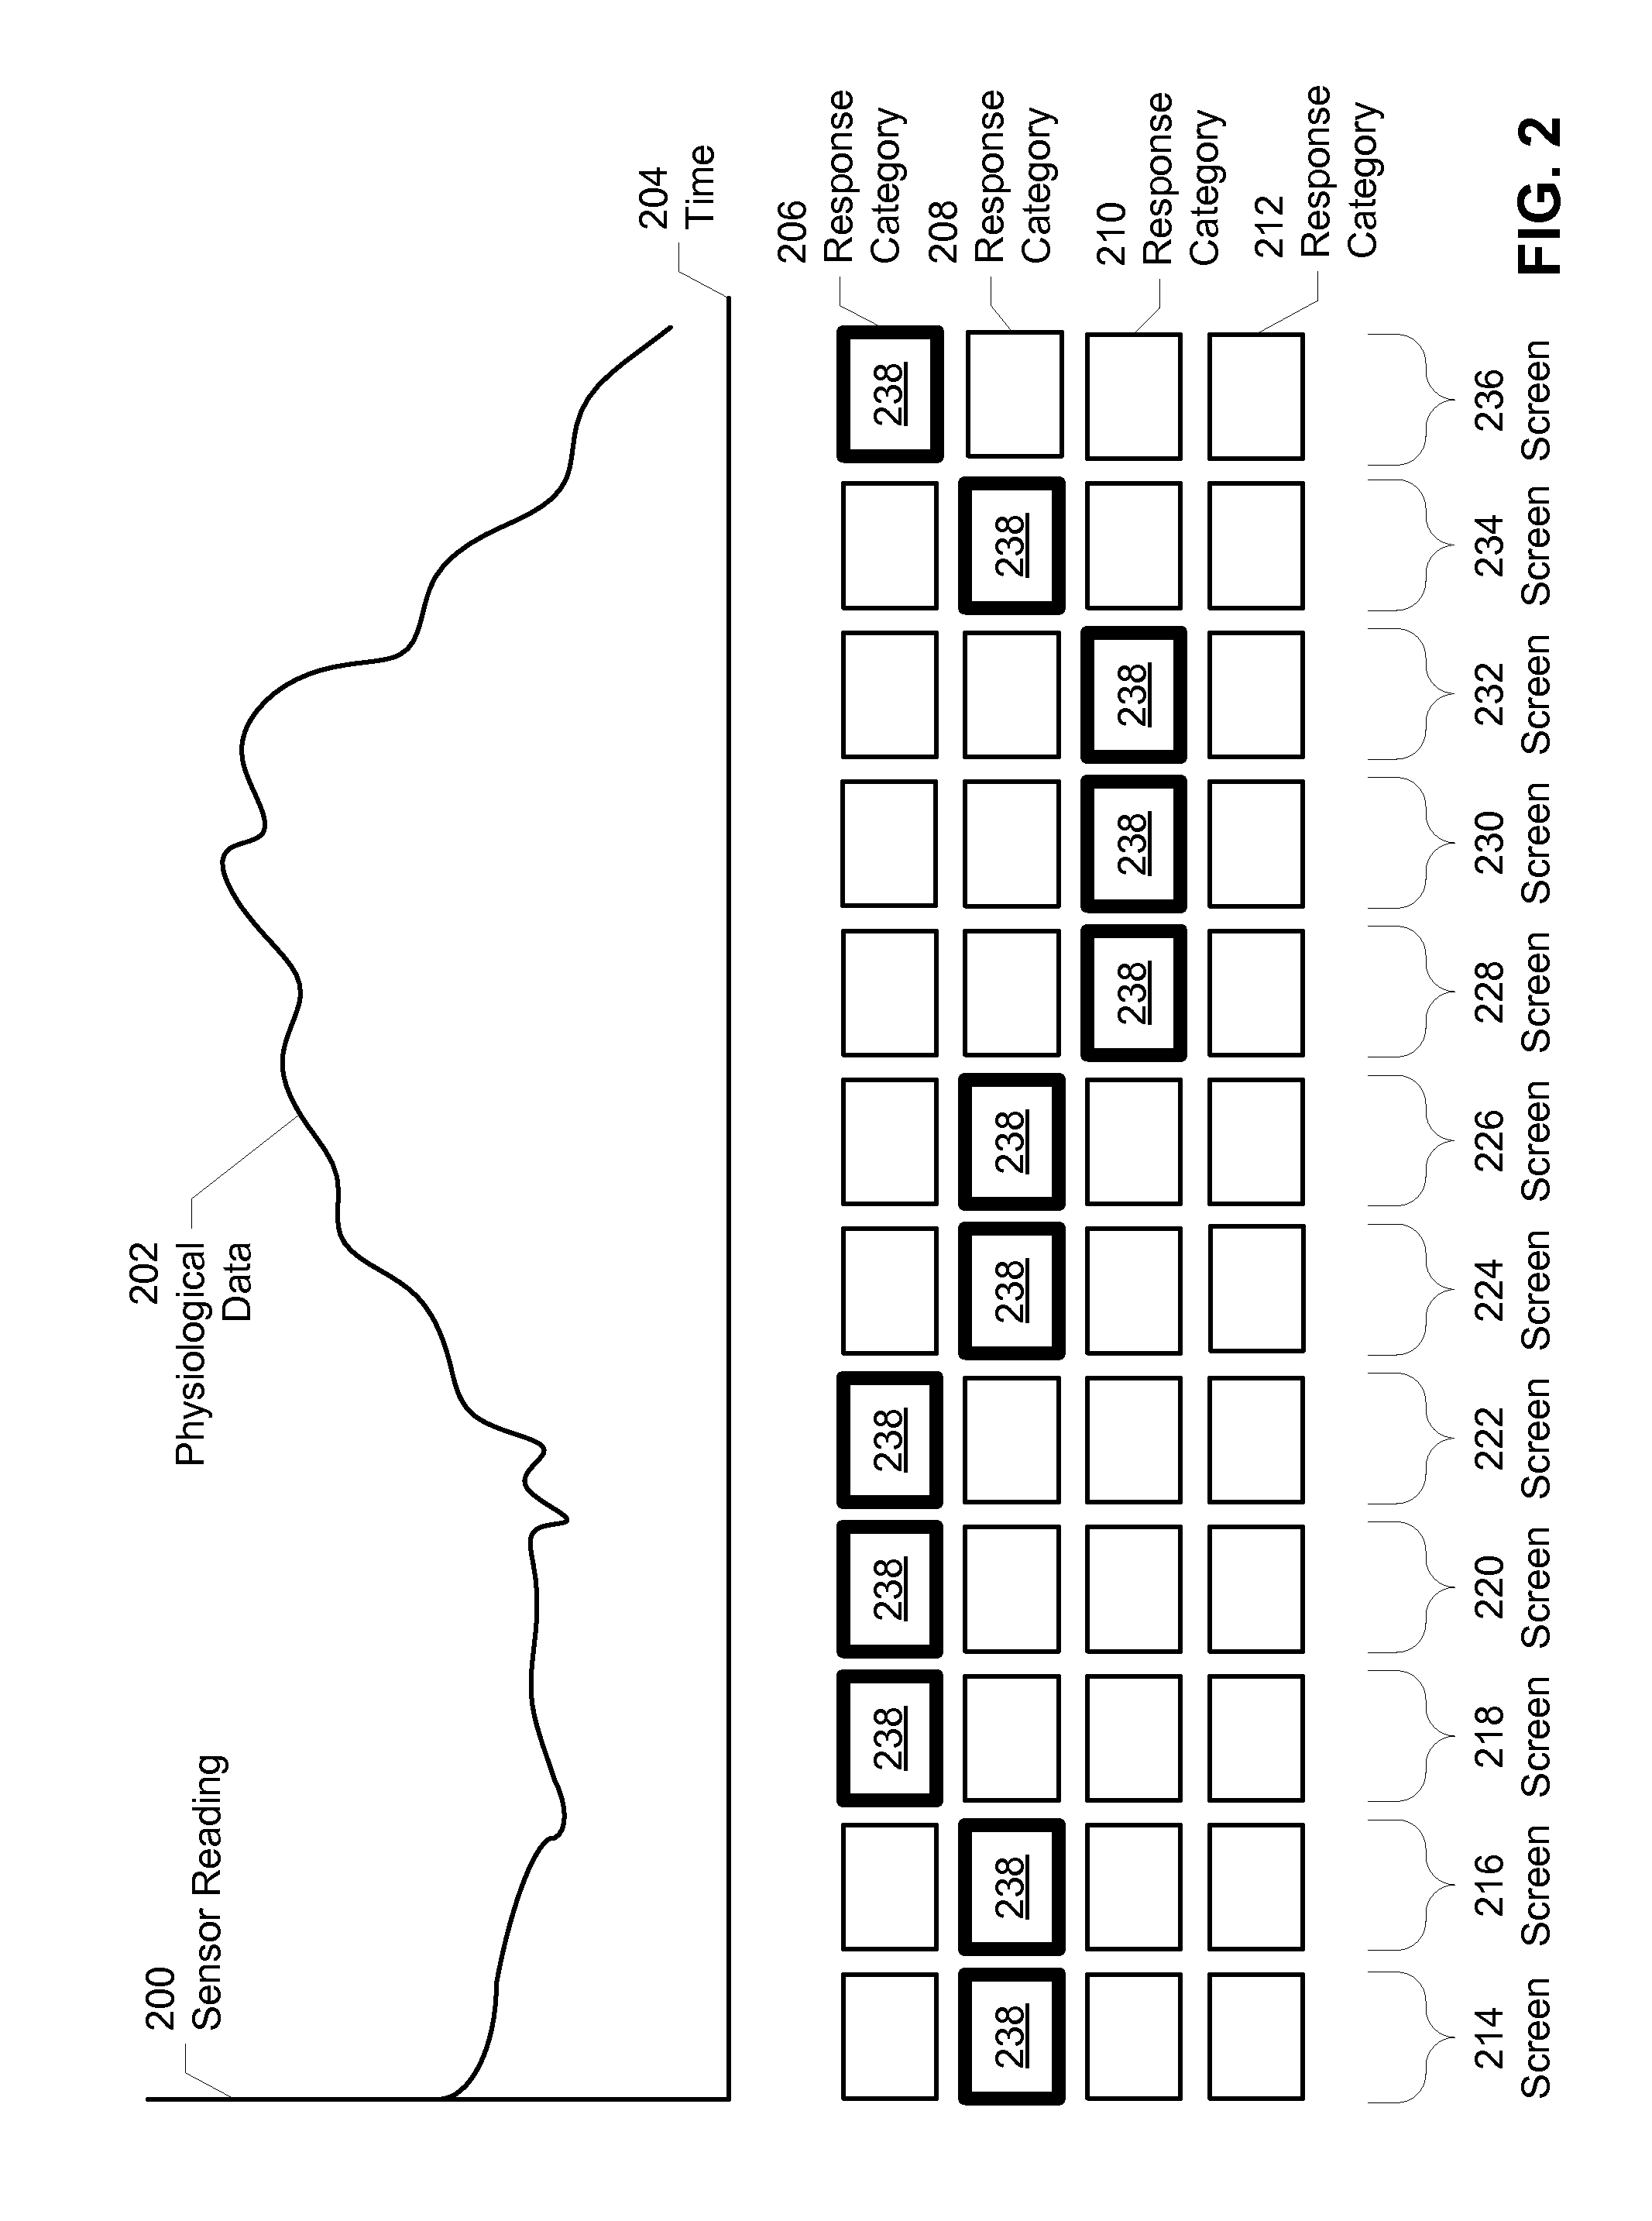 Method and system for dynamic adaptation of user experience in an application